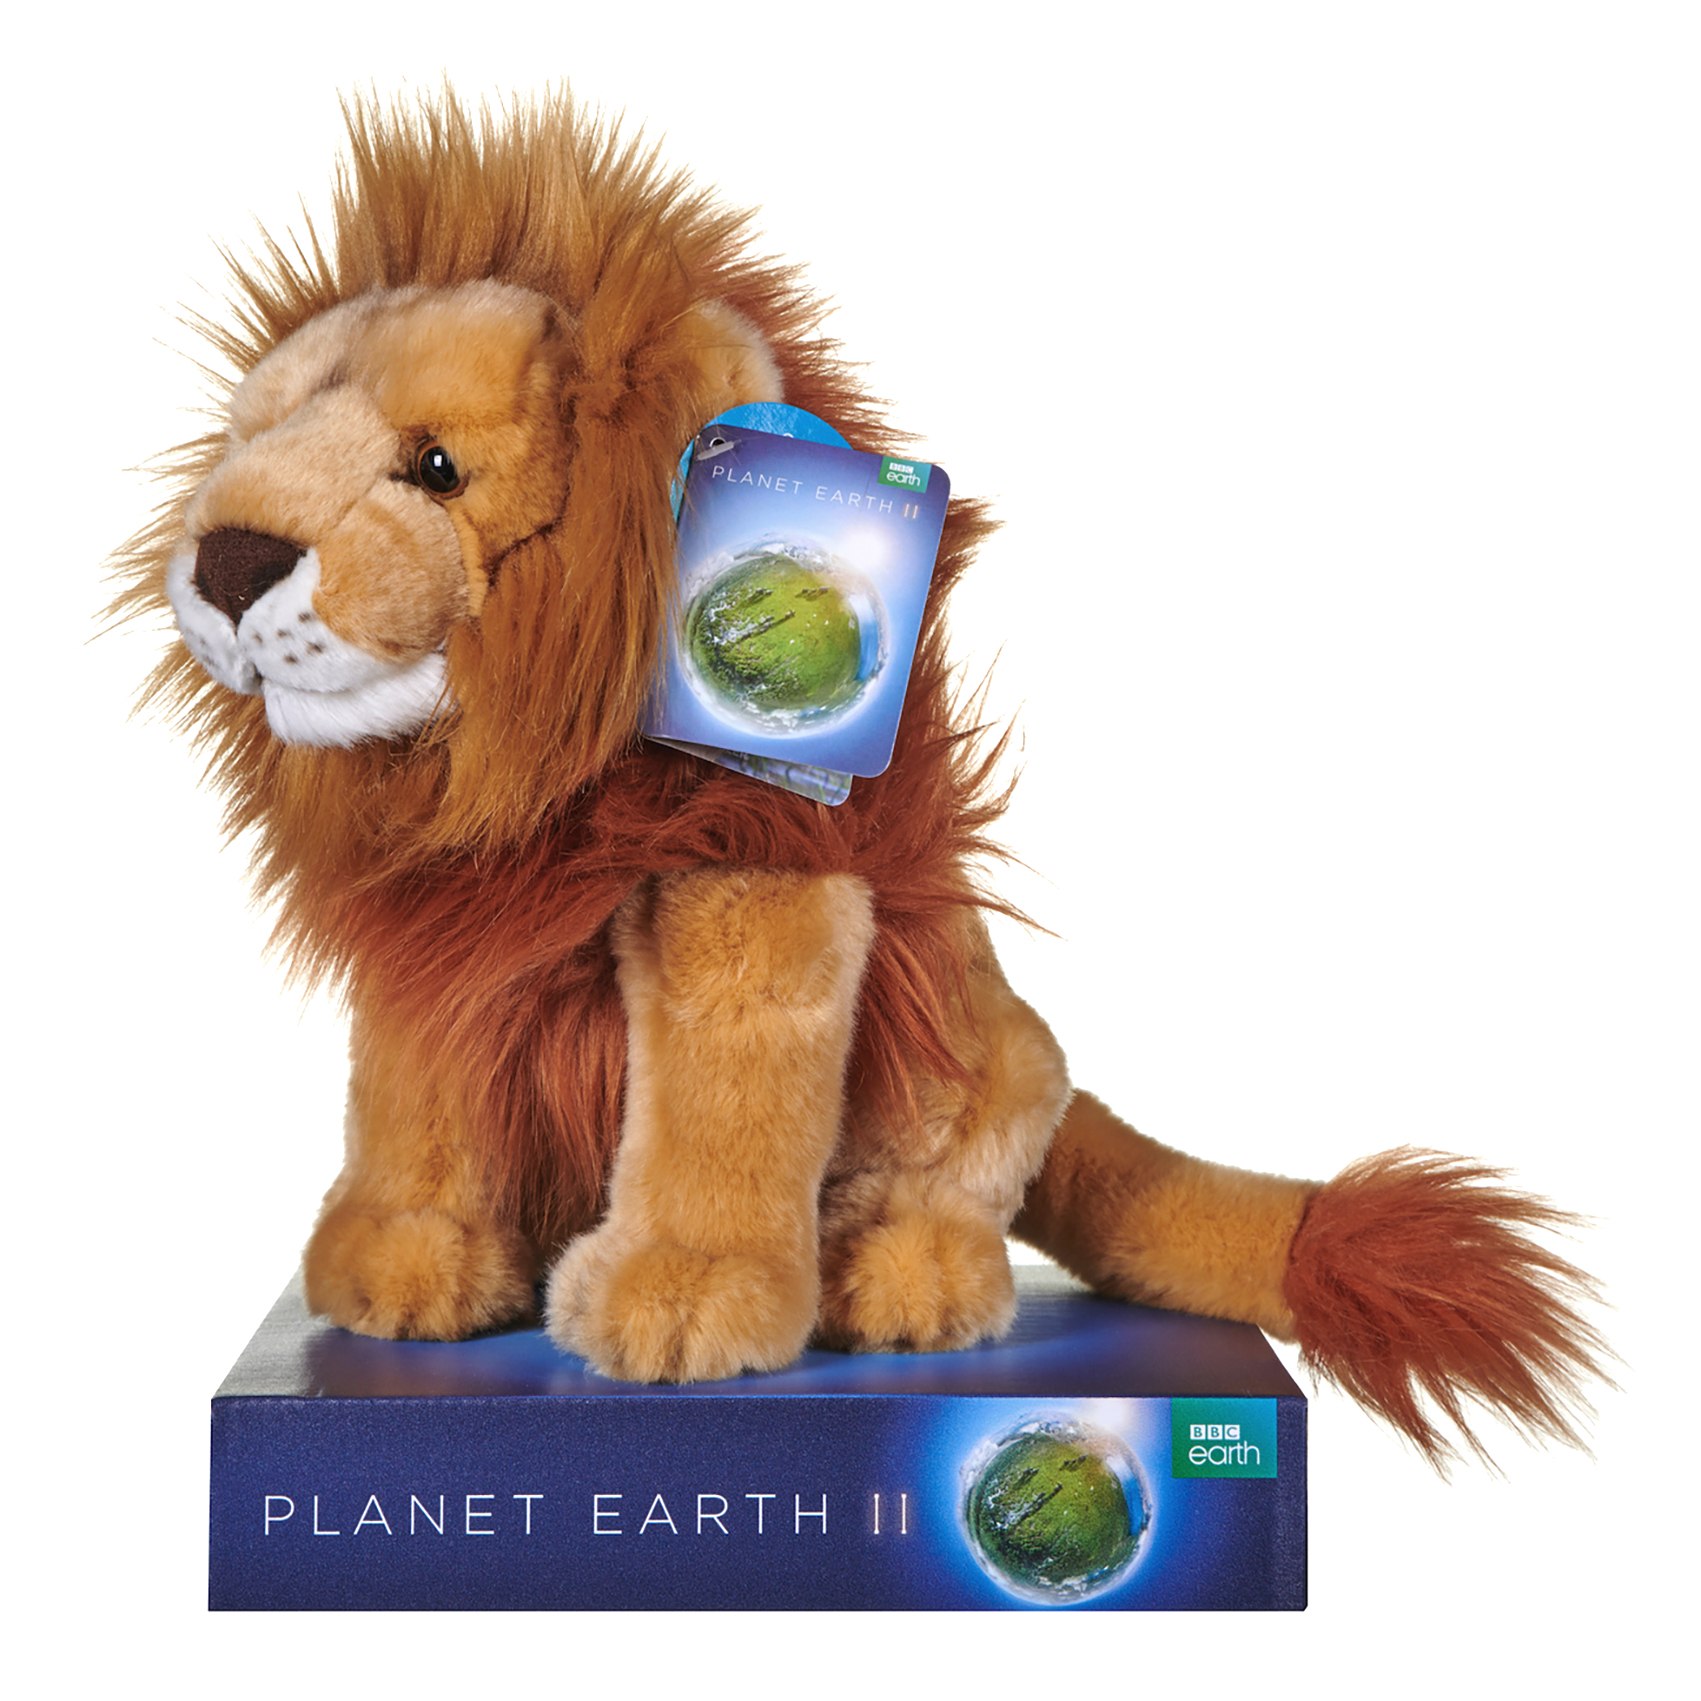 NEW 10" BBC EARTH BOXED LION SOFT TOY PLANET EARTH 